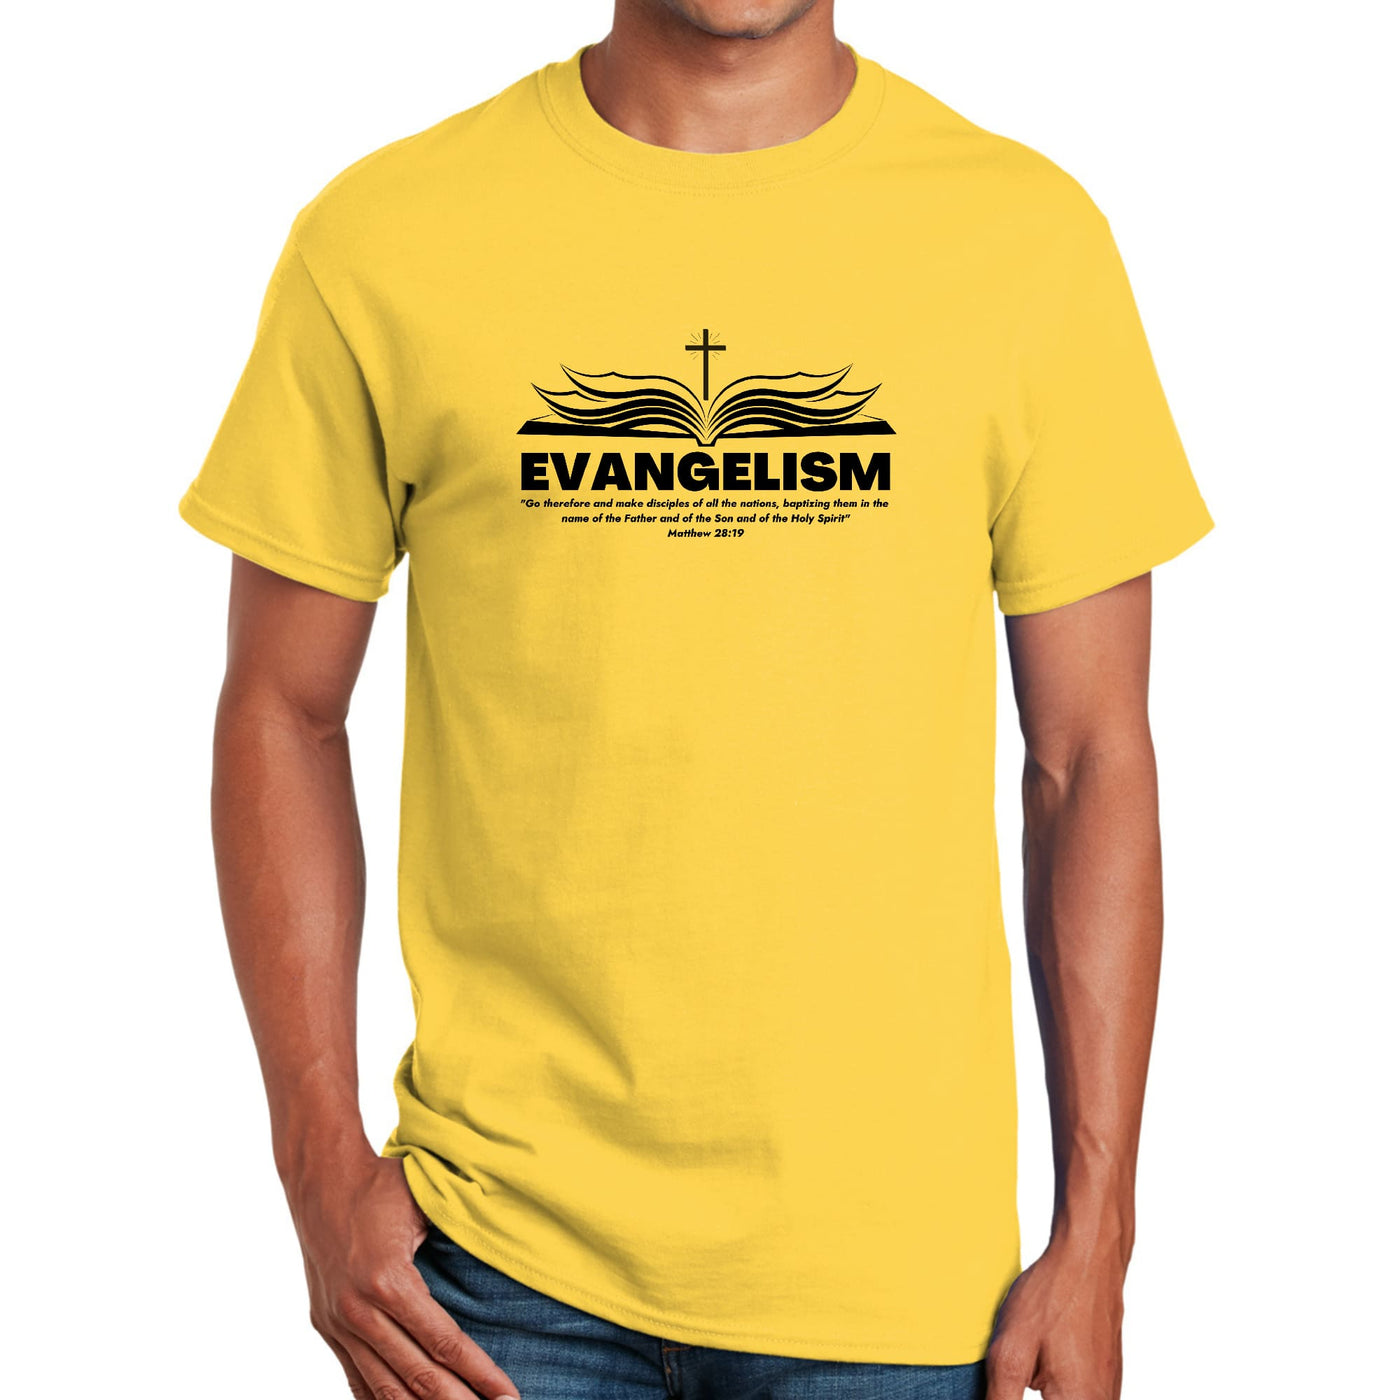 Mens Performance T - shirt Evangelism - Go Therefore And Make Disciples | T